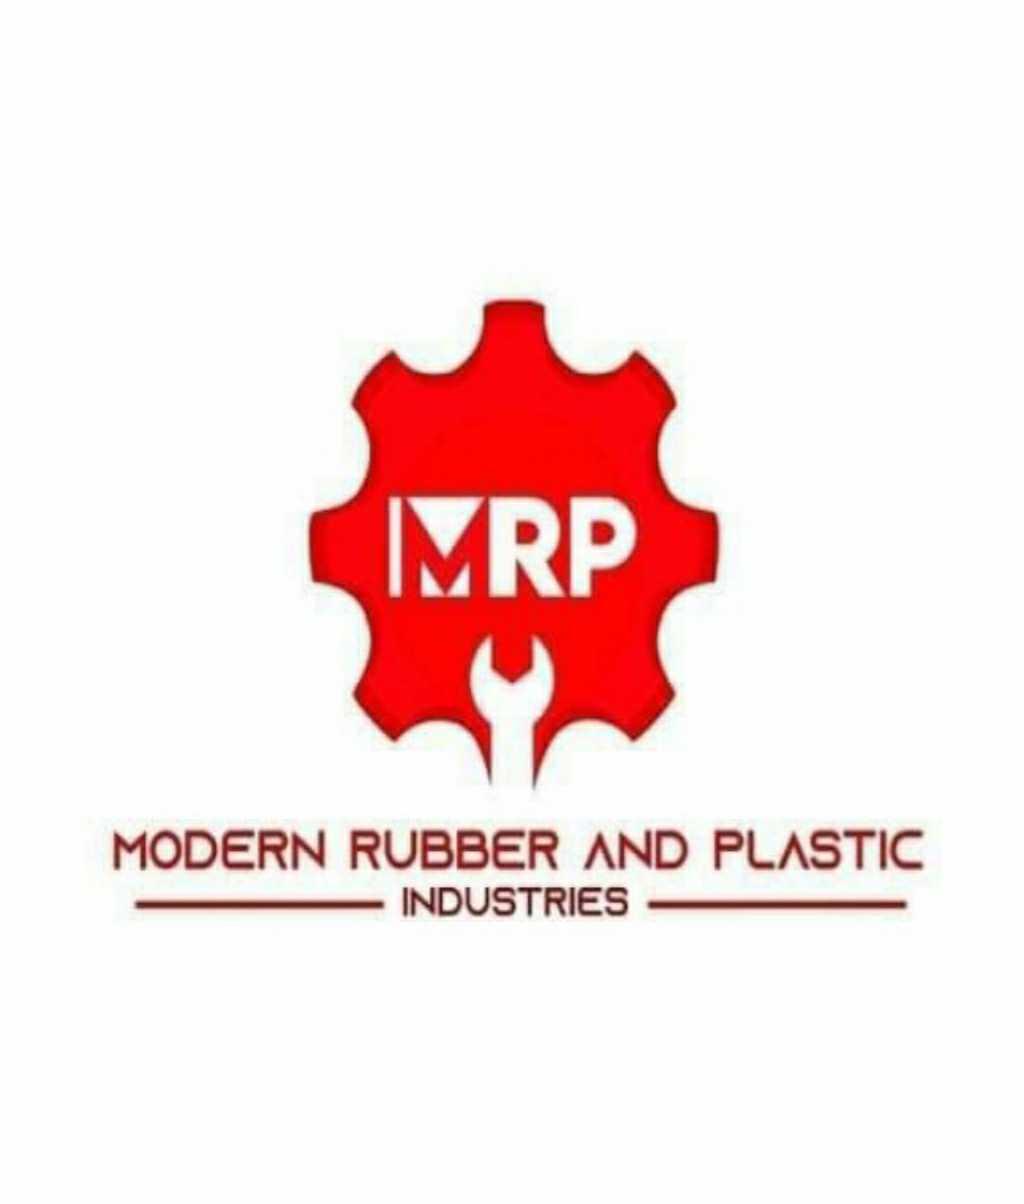 MODERN RUBBER AND PLASTIC INDUSTRIES